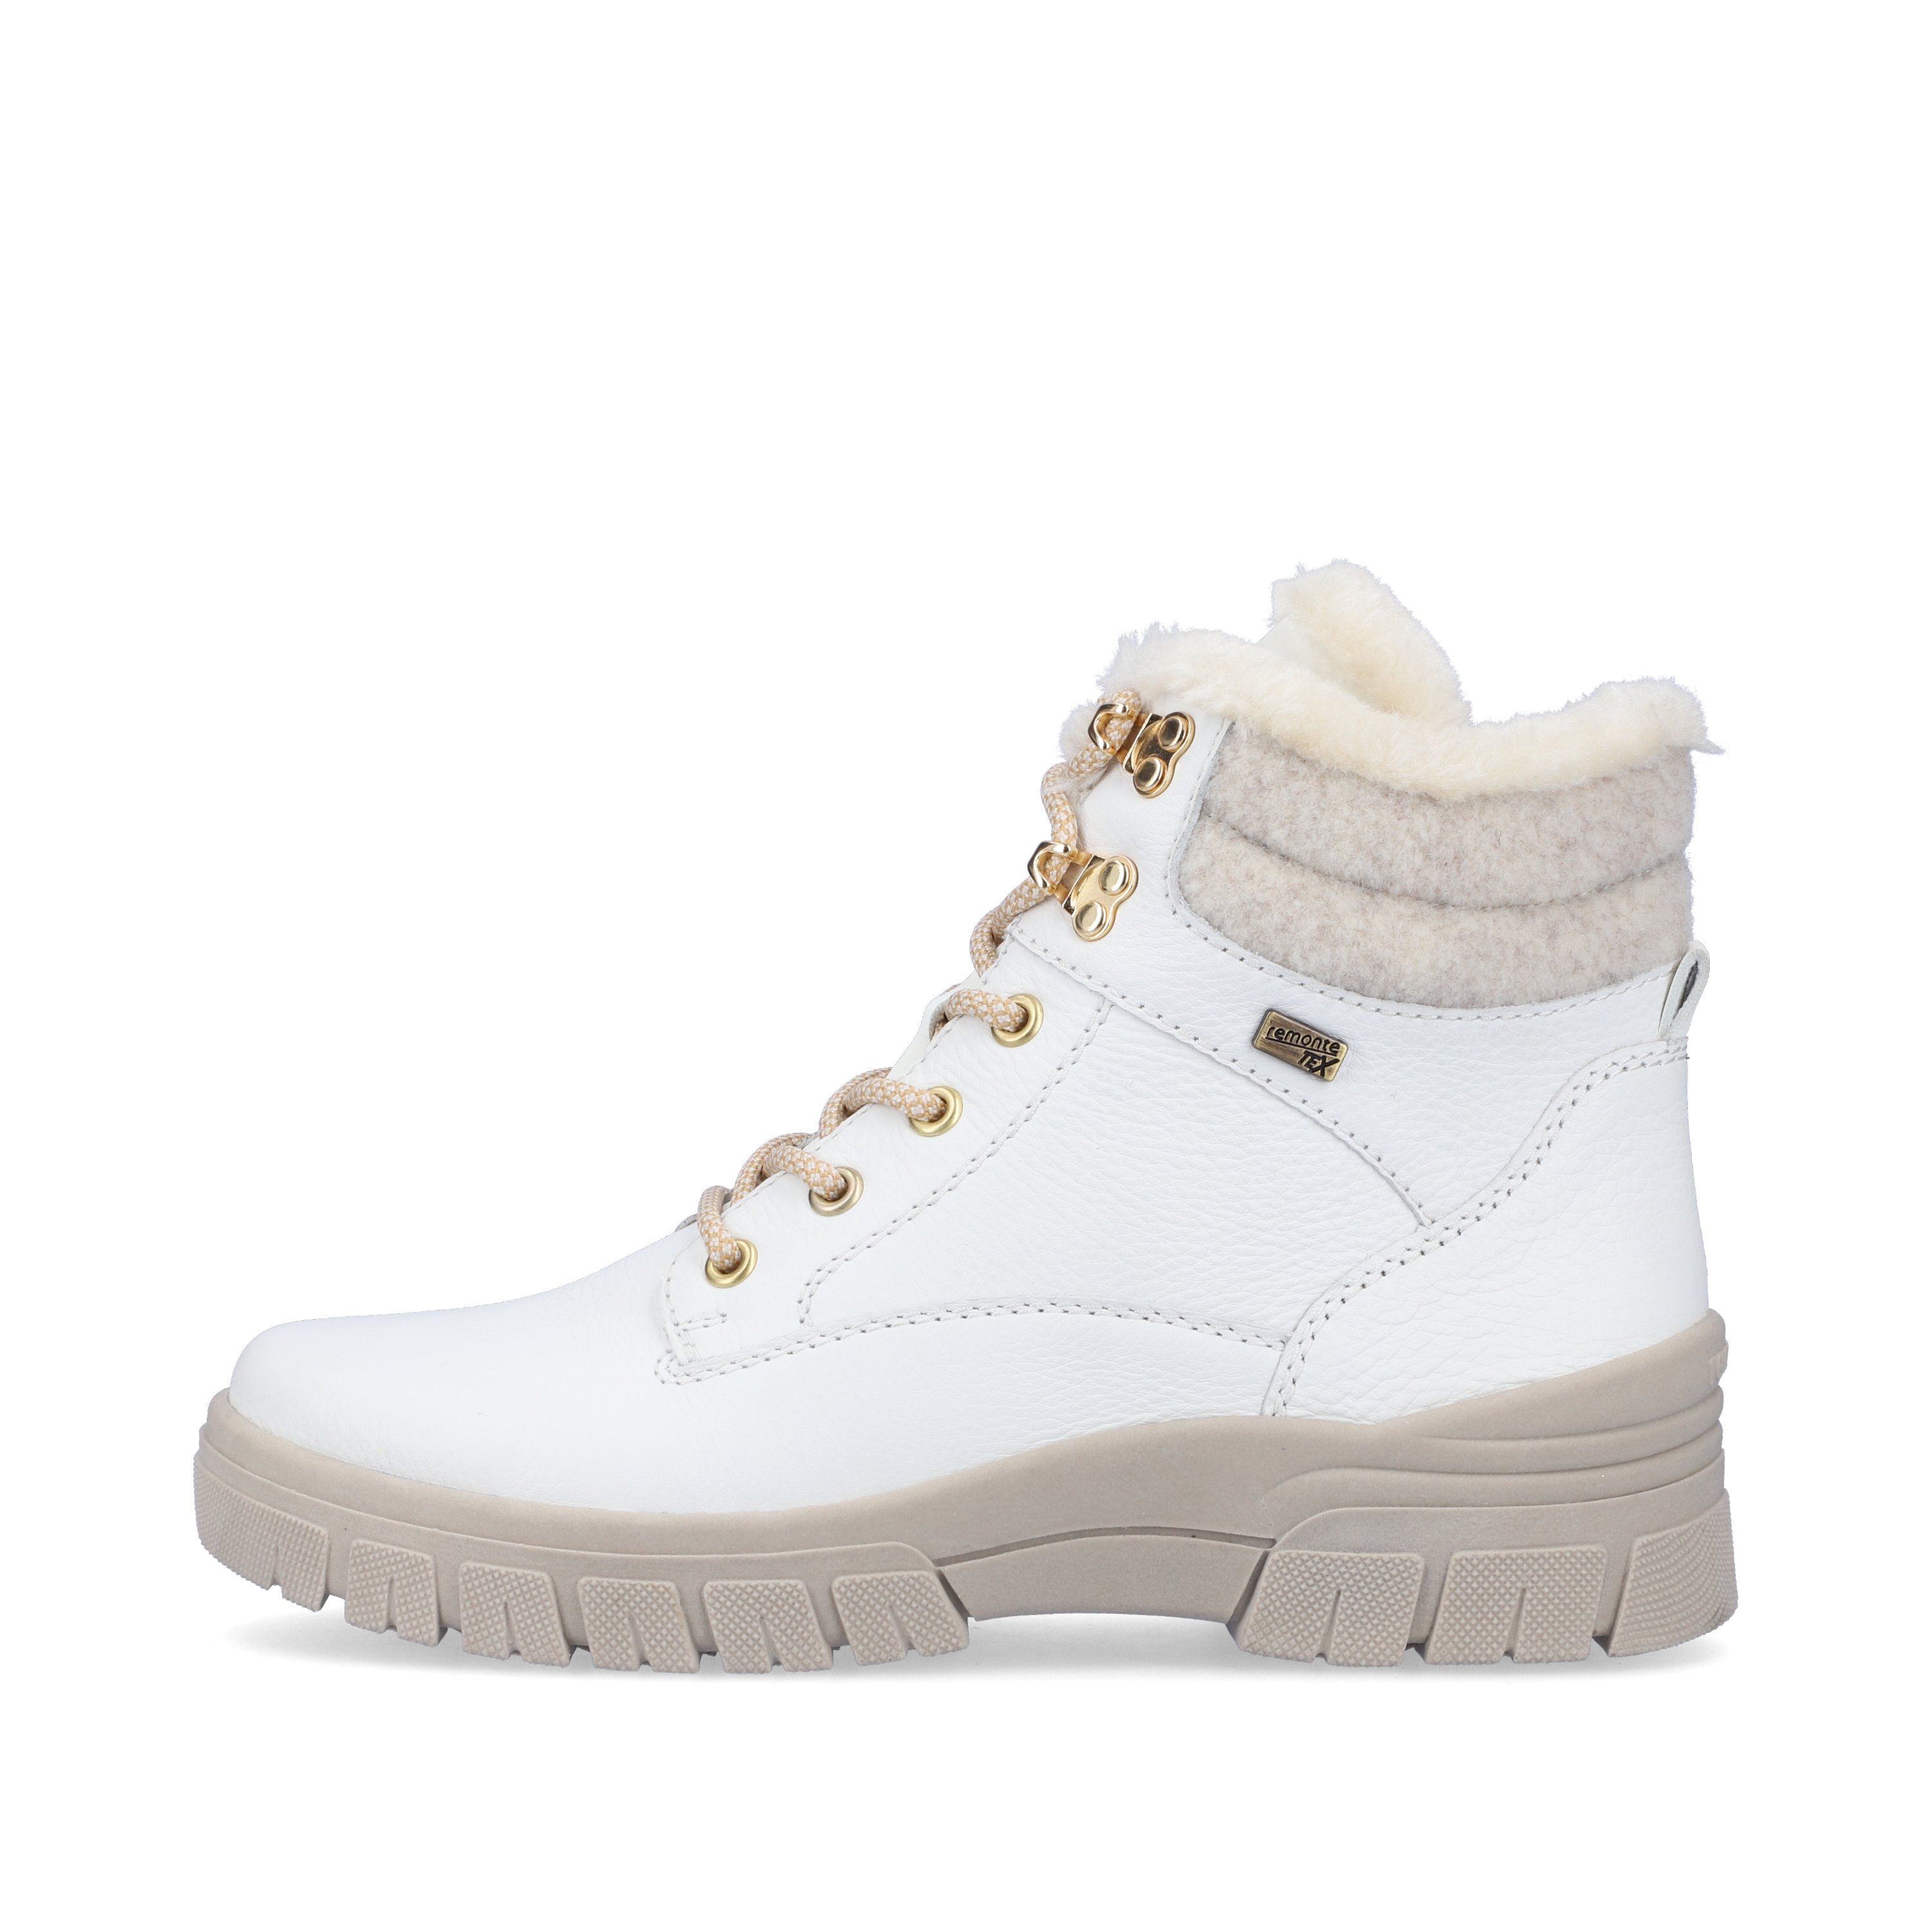 Off-white remonte women´s lace-up boots D0E71-80 with lacing and zipper. The outside of the shoe